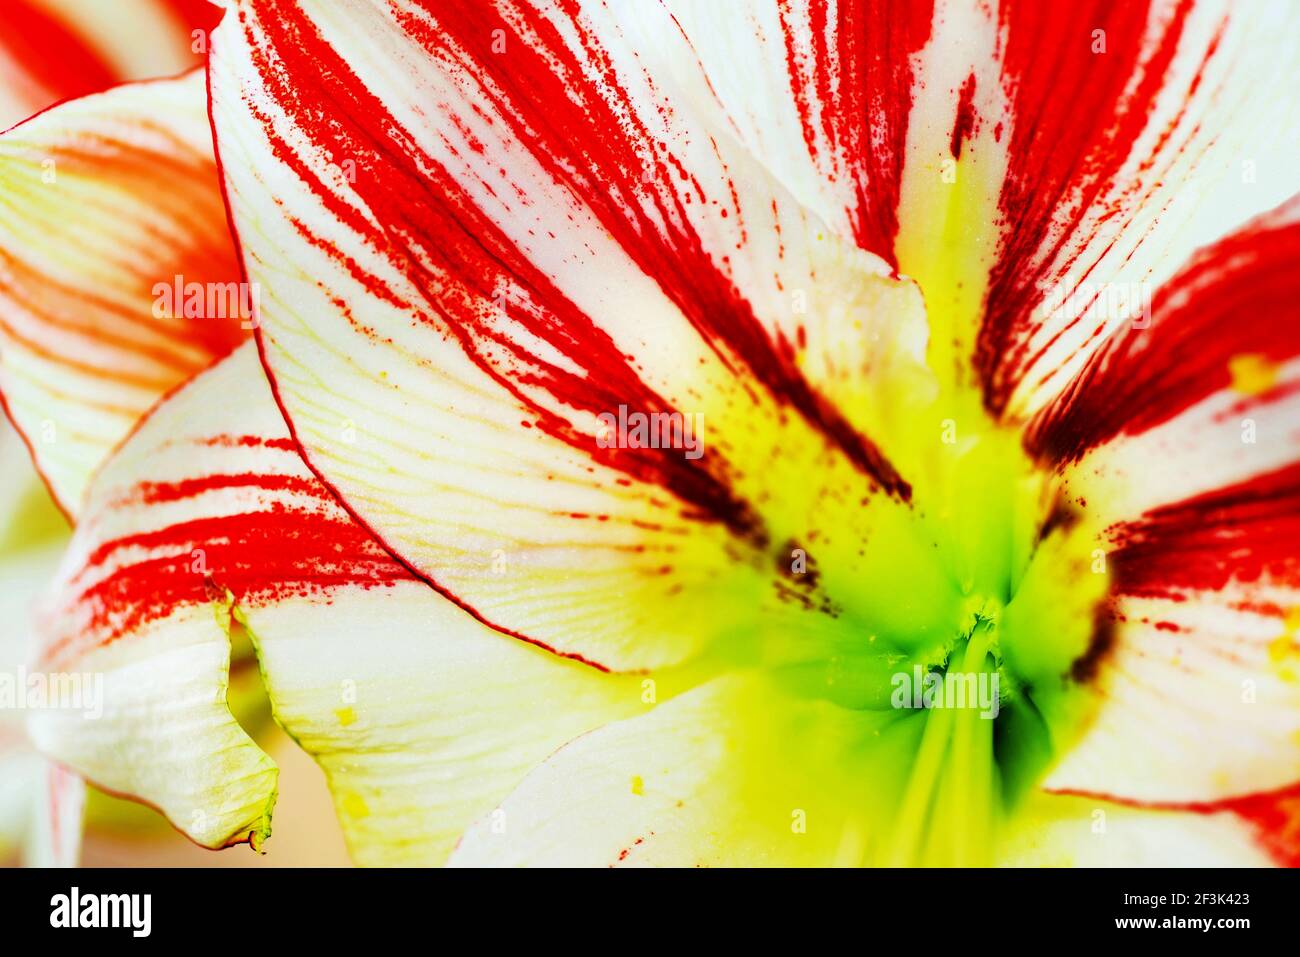 Detail of Amaryllis ambiance with red and white striped petals and yelow- green ovary Stock Photo